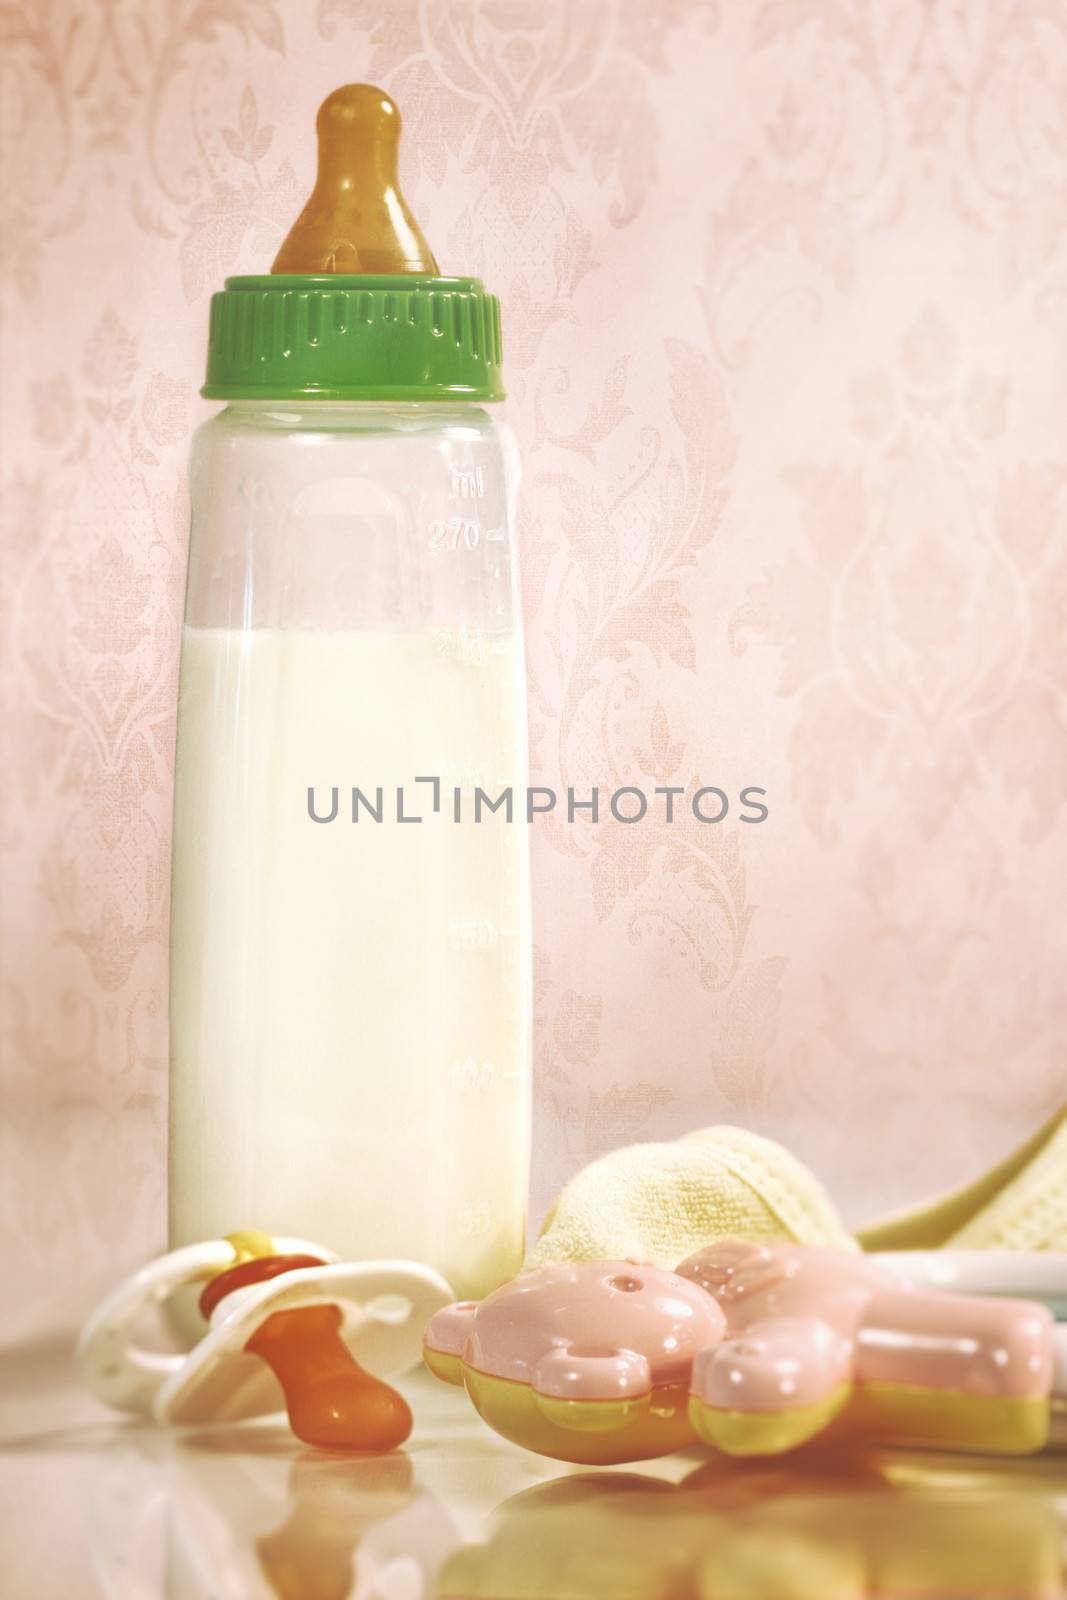 Baby bottle with milk on counter by Sandralise